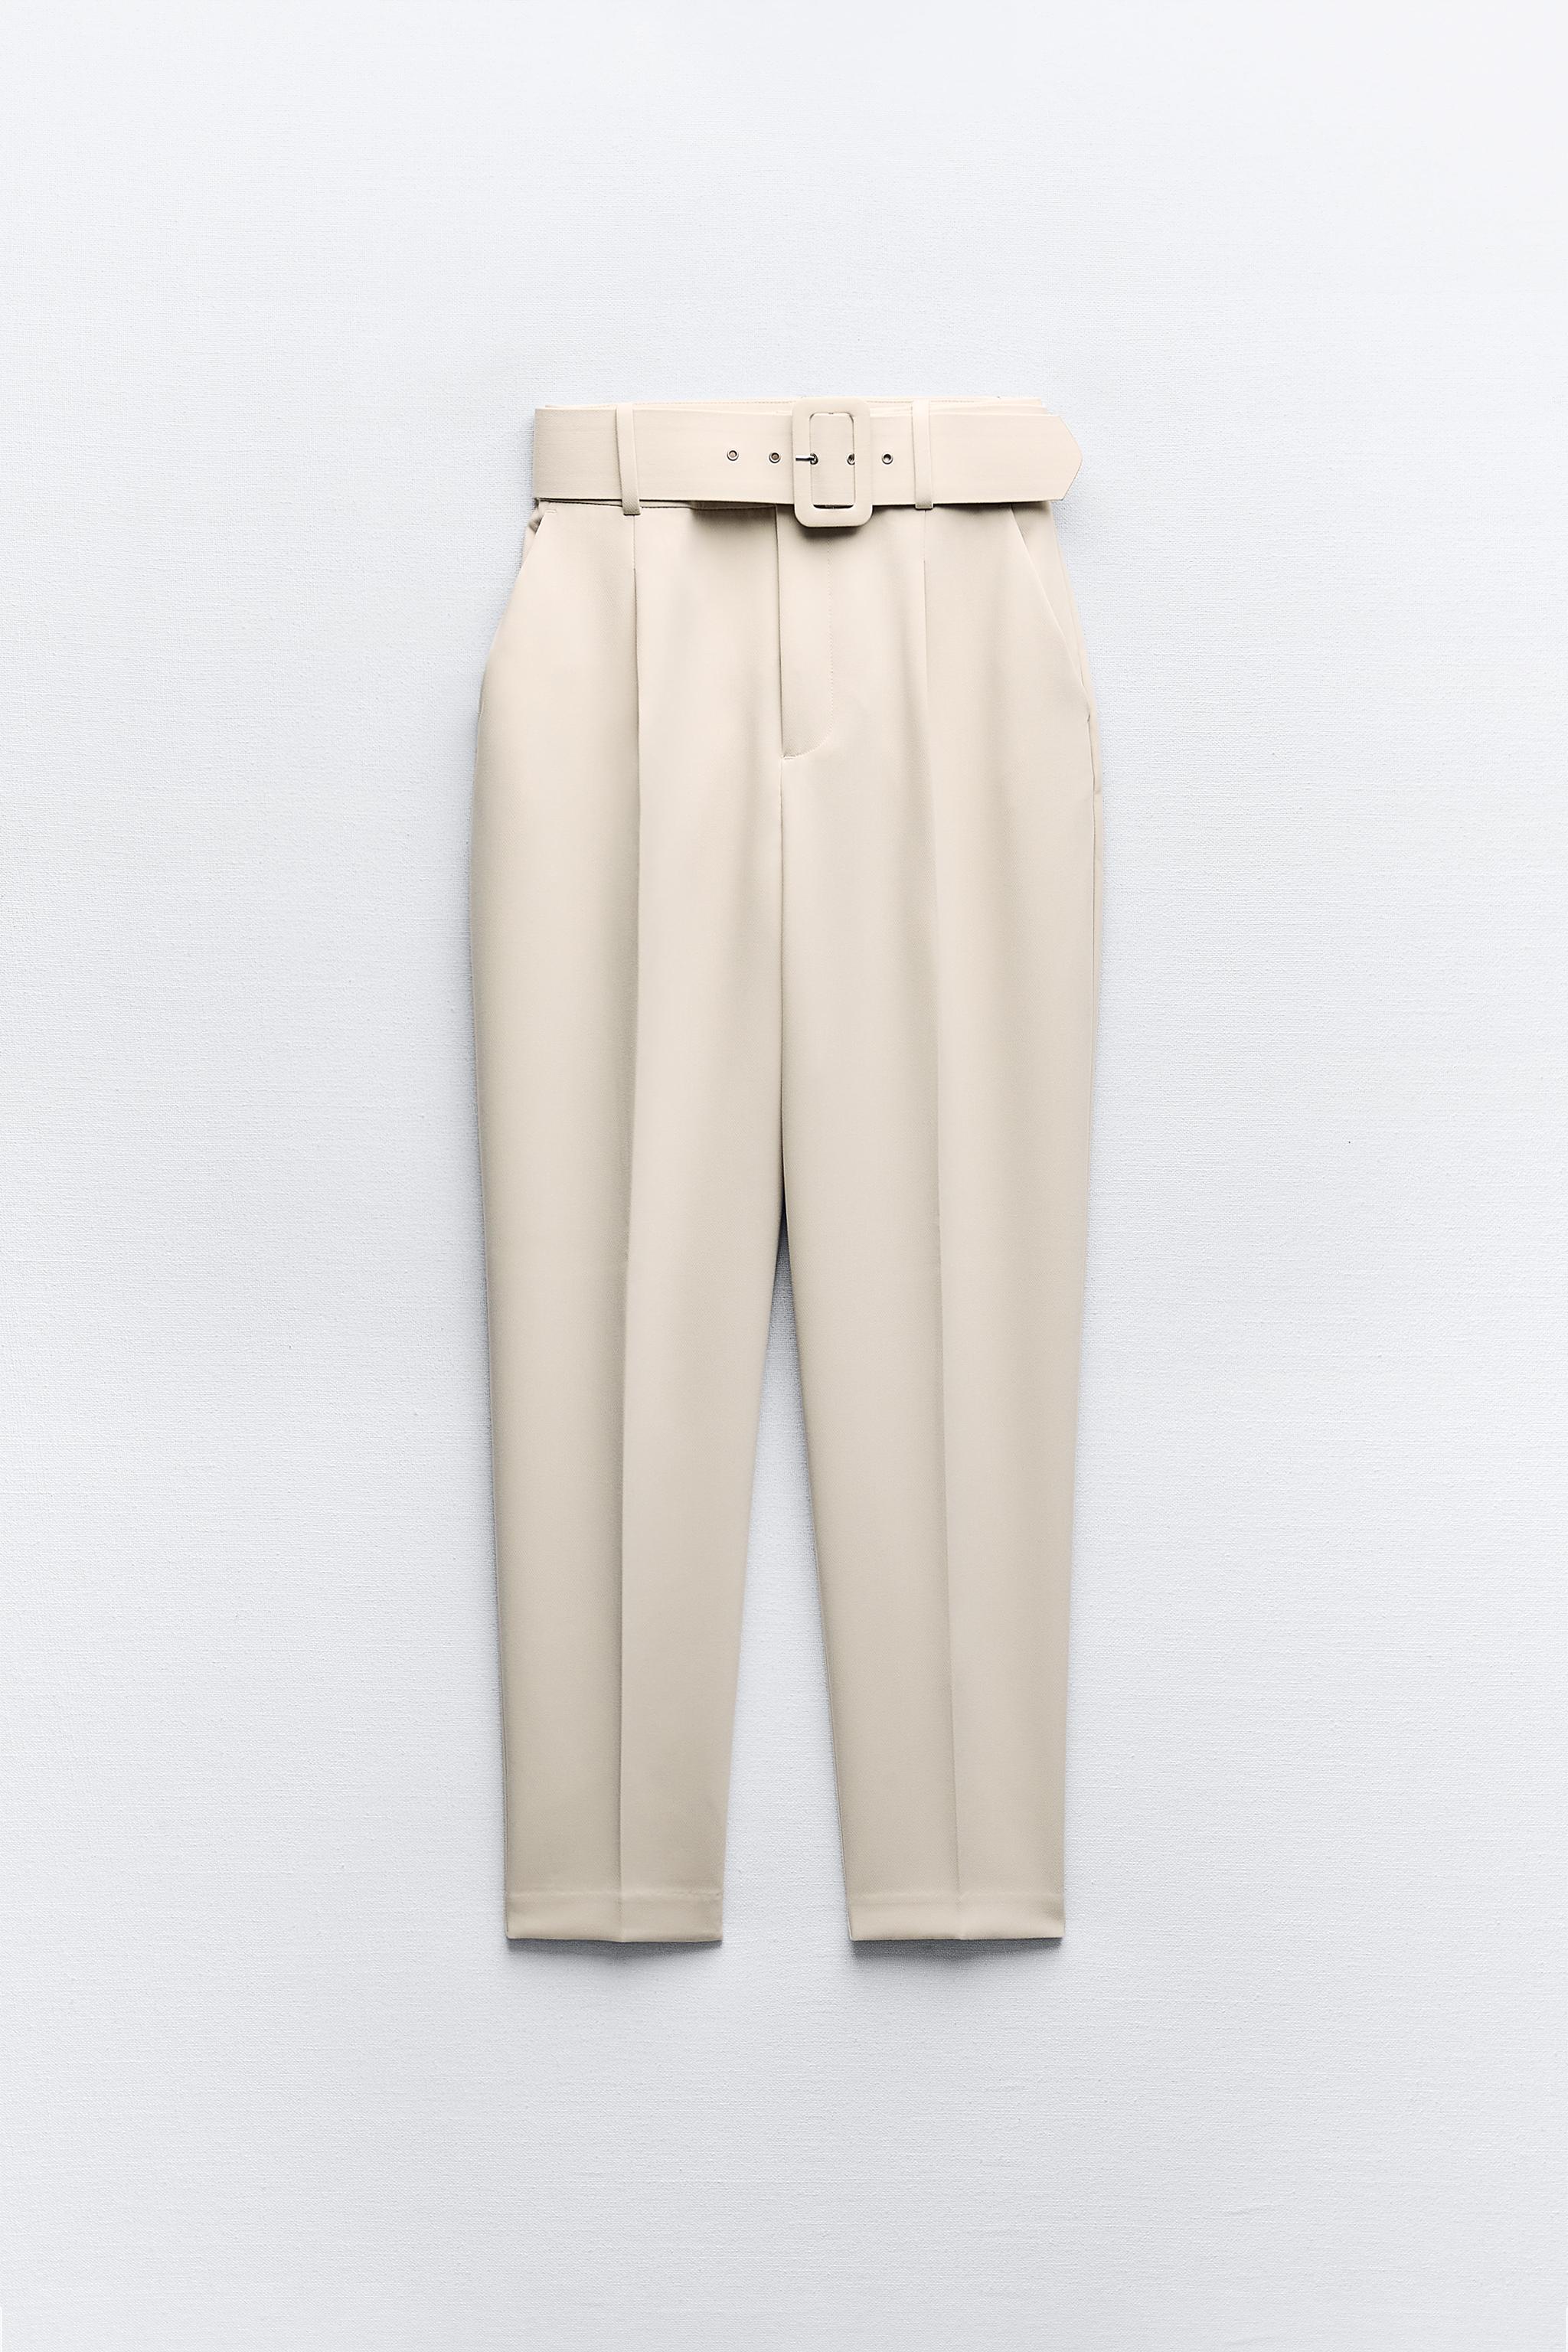 Cream High Waist Belted Pants with Button Cuff - WANTS